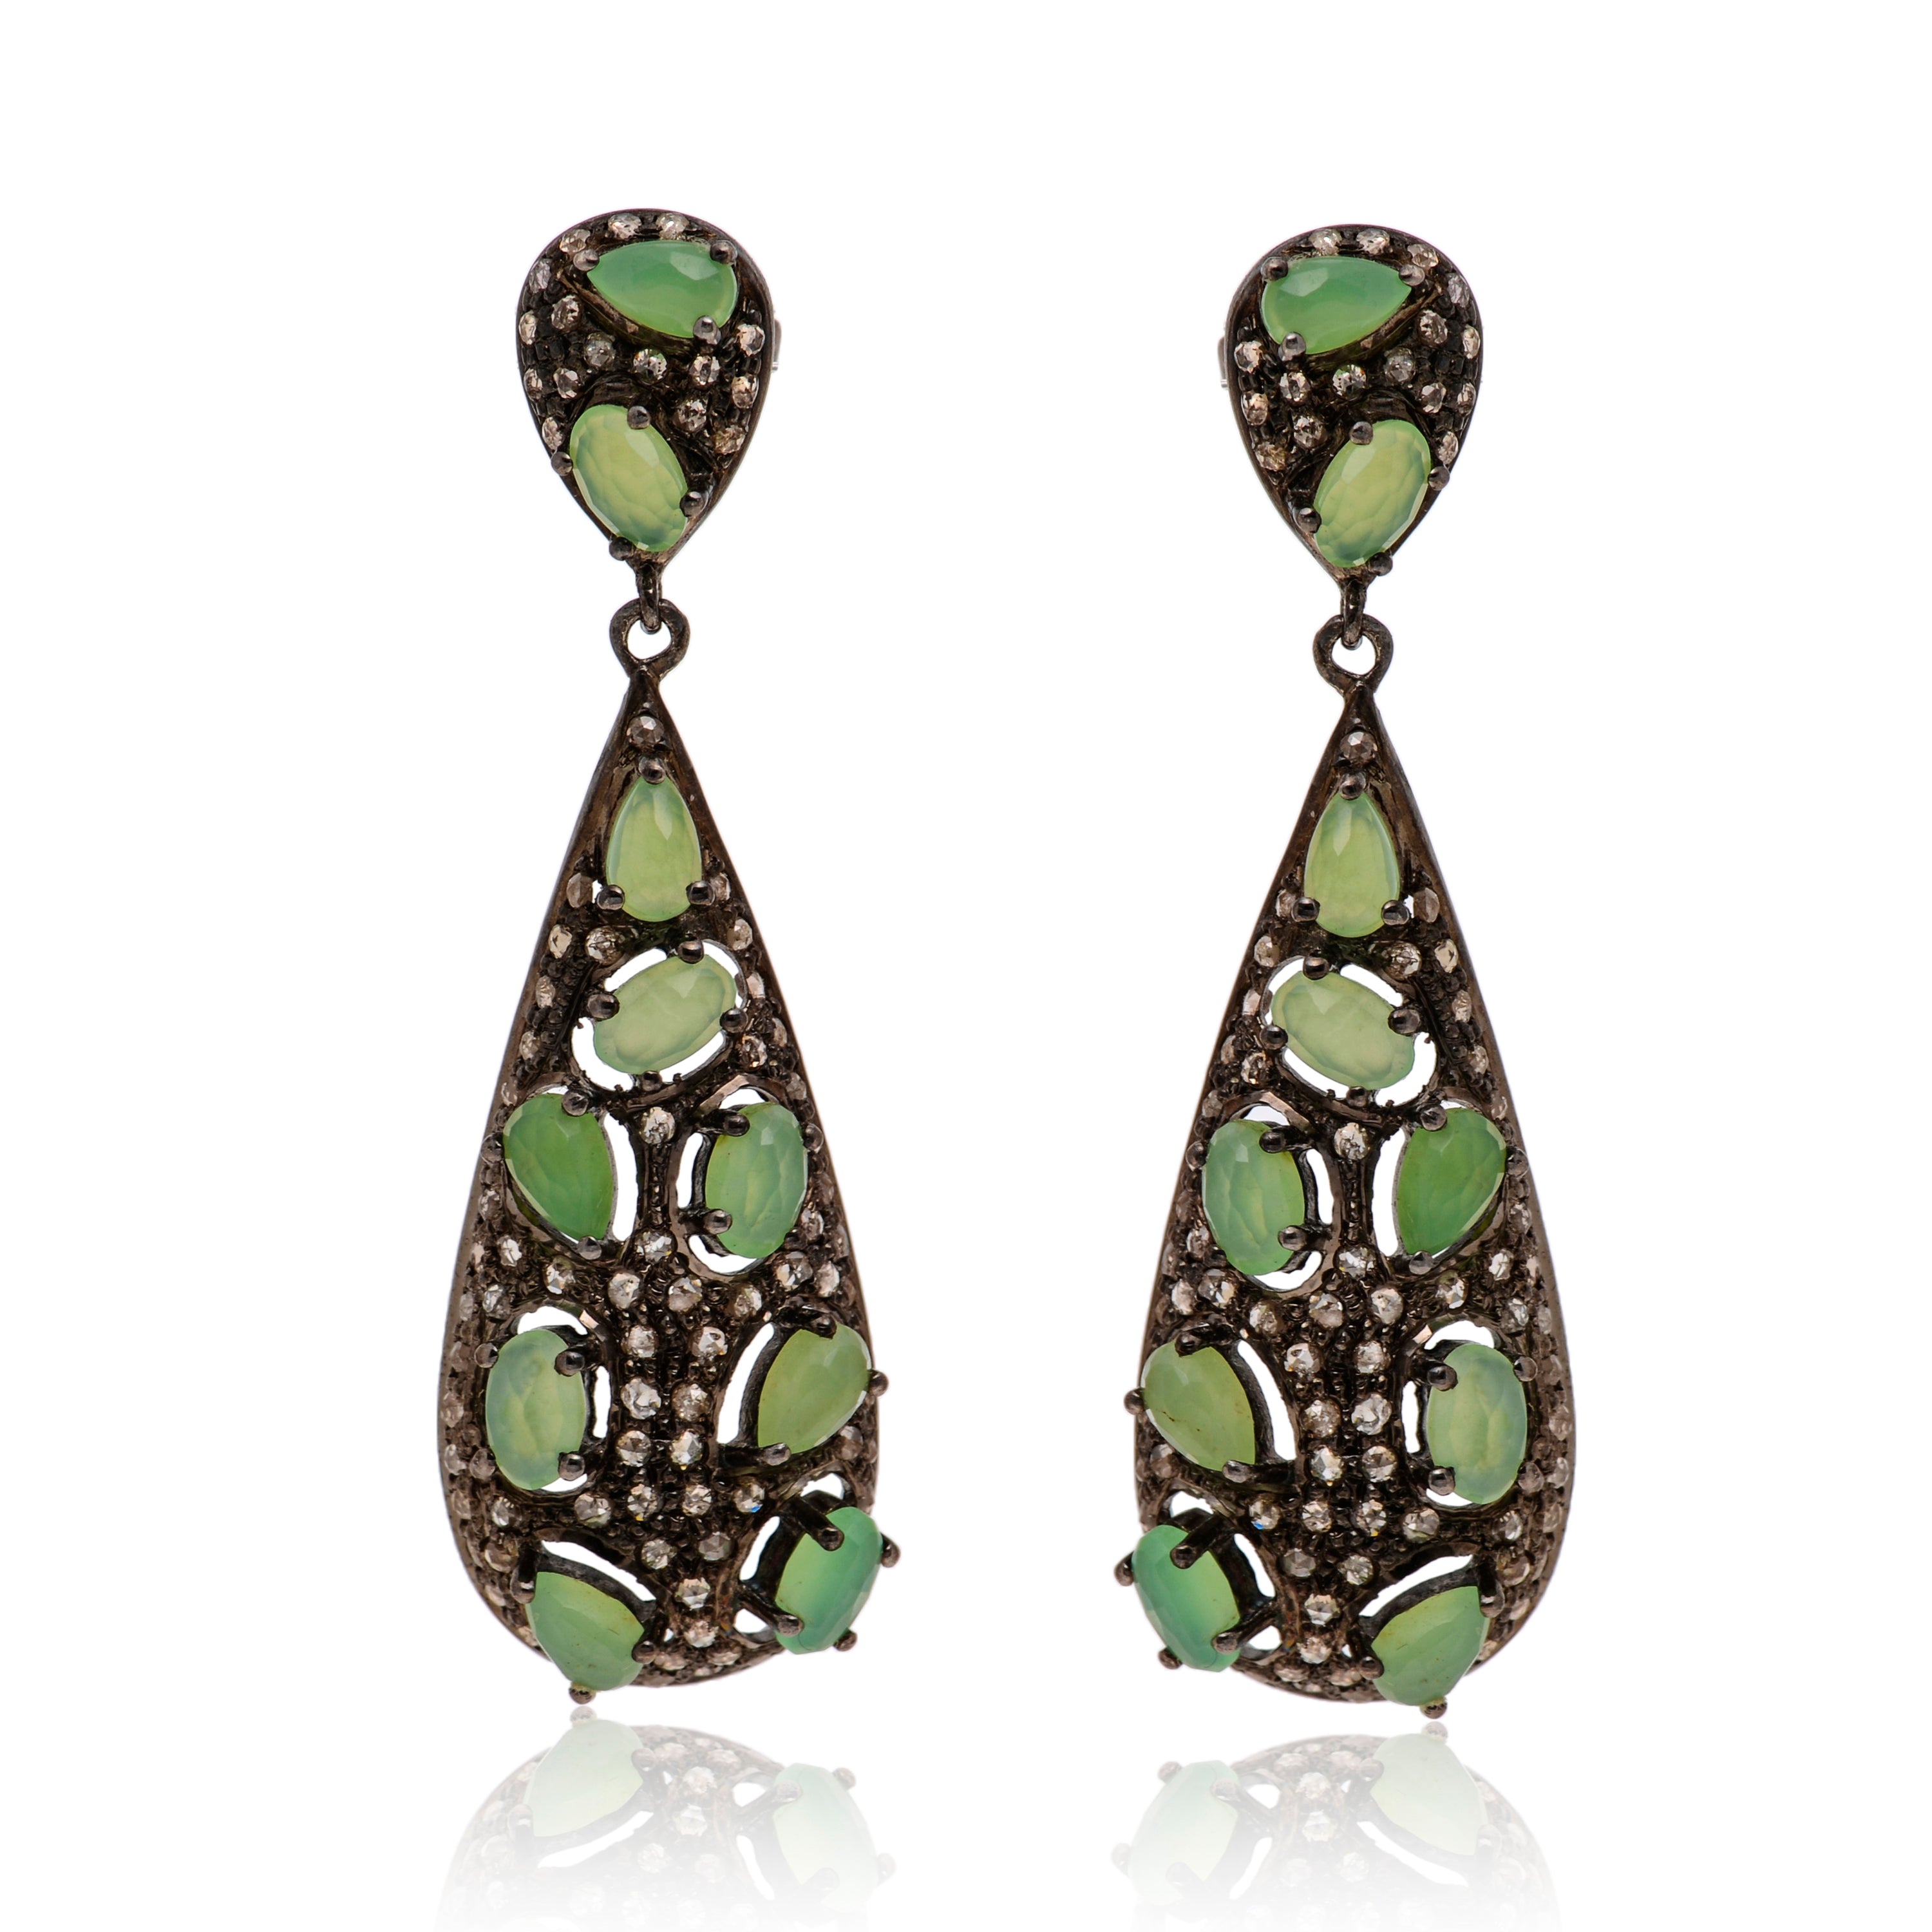 Bavna Sterling Silver, Chrysoprase 4.51ct. Tw. And Rose Cut Diamonds 1.71ct. Tw. Drop Earrings In Green